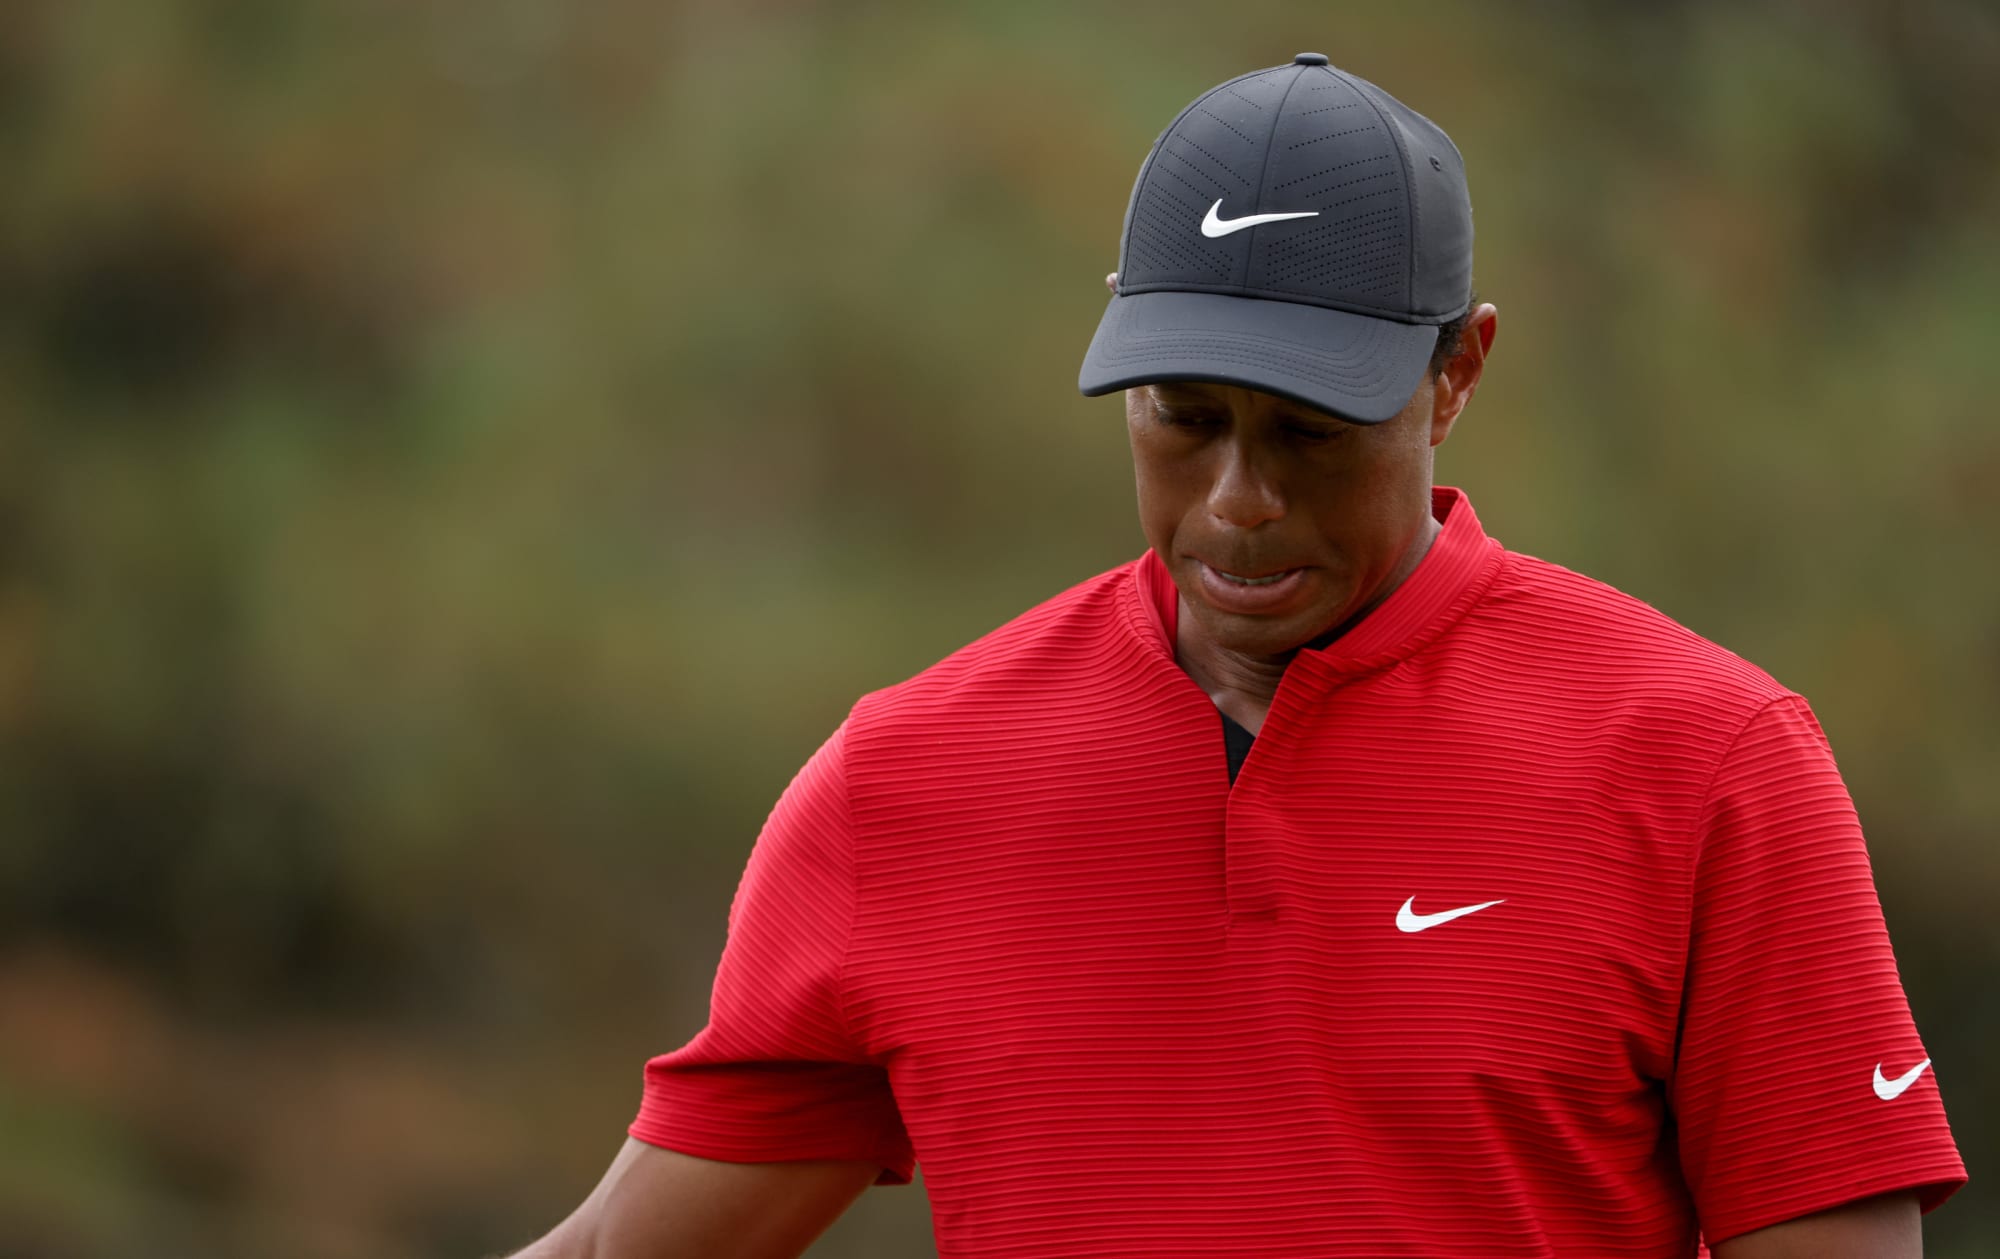 The Masters: Tiger Woods Makes 10 on Par 3, Then Rallies